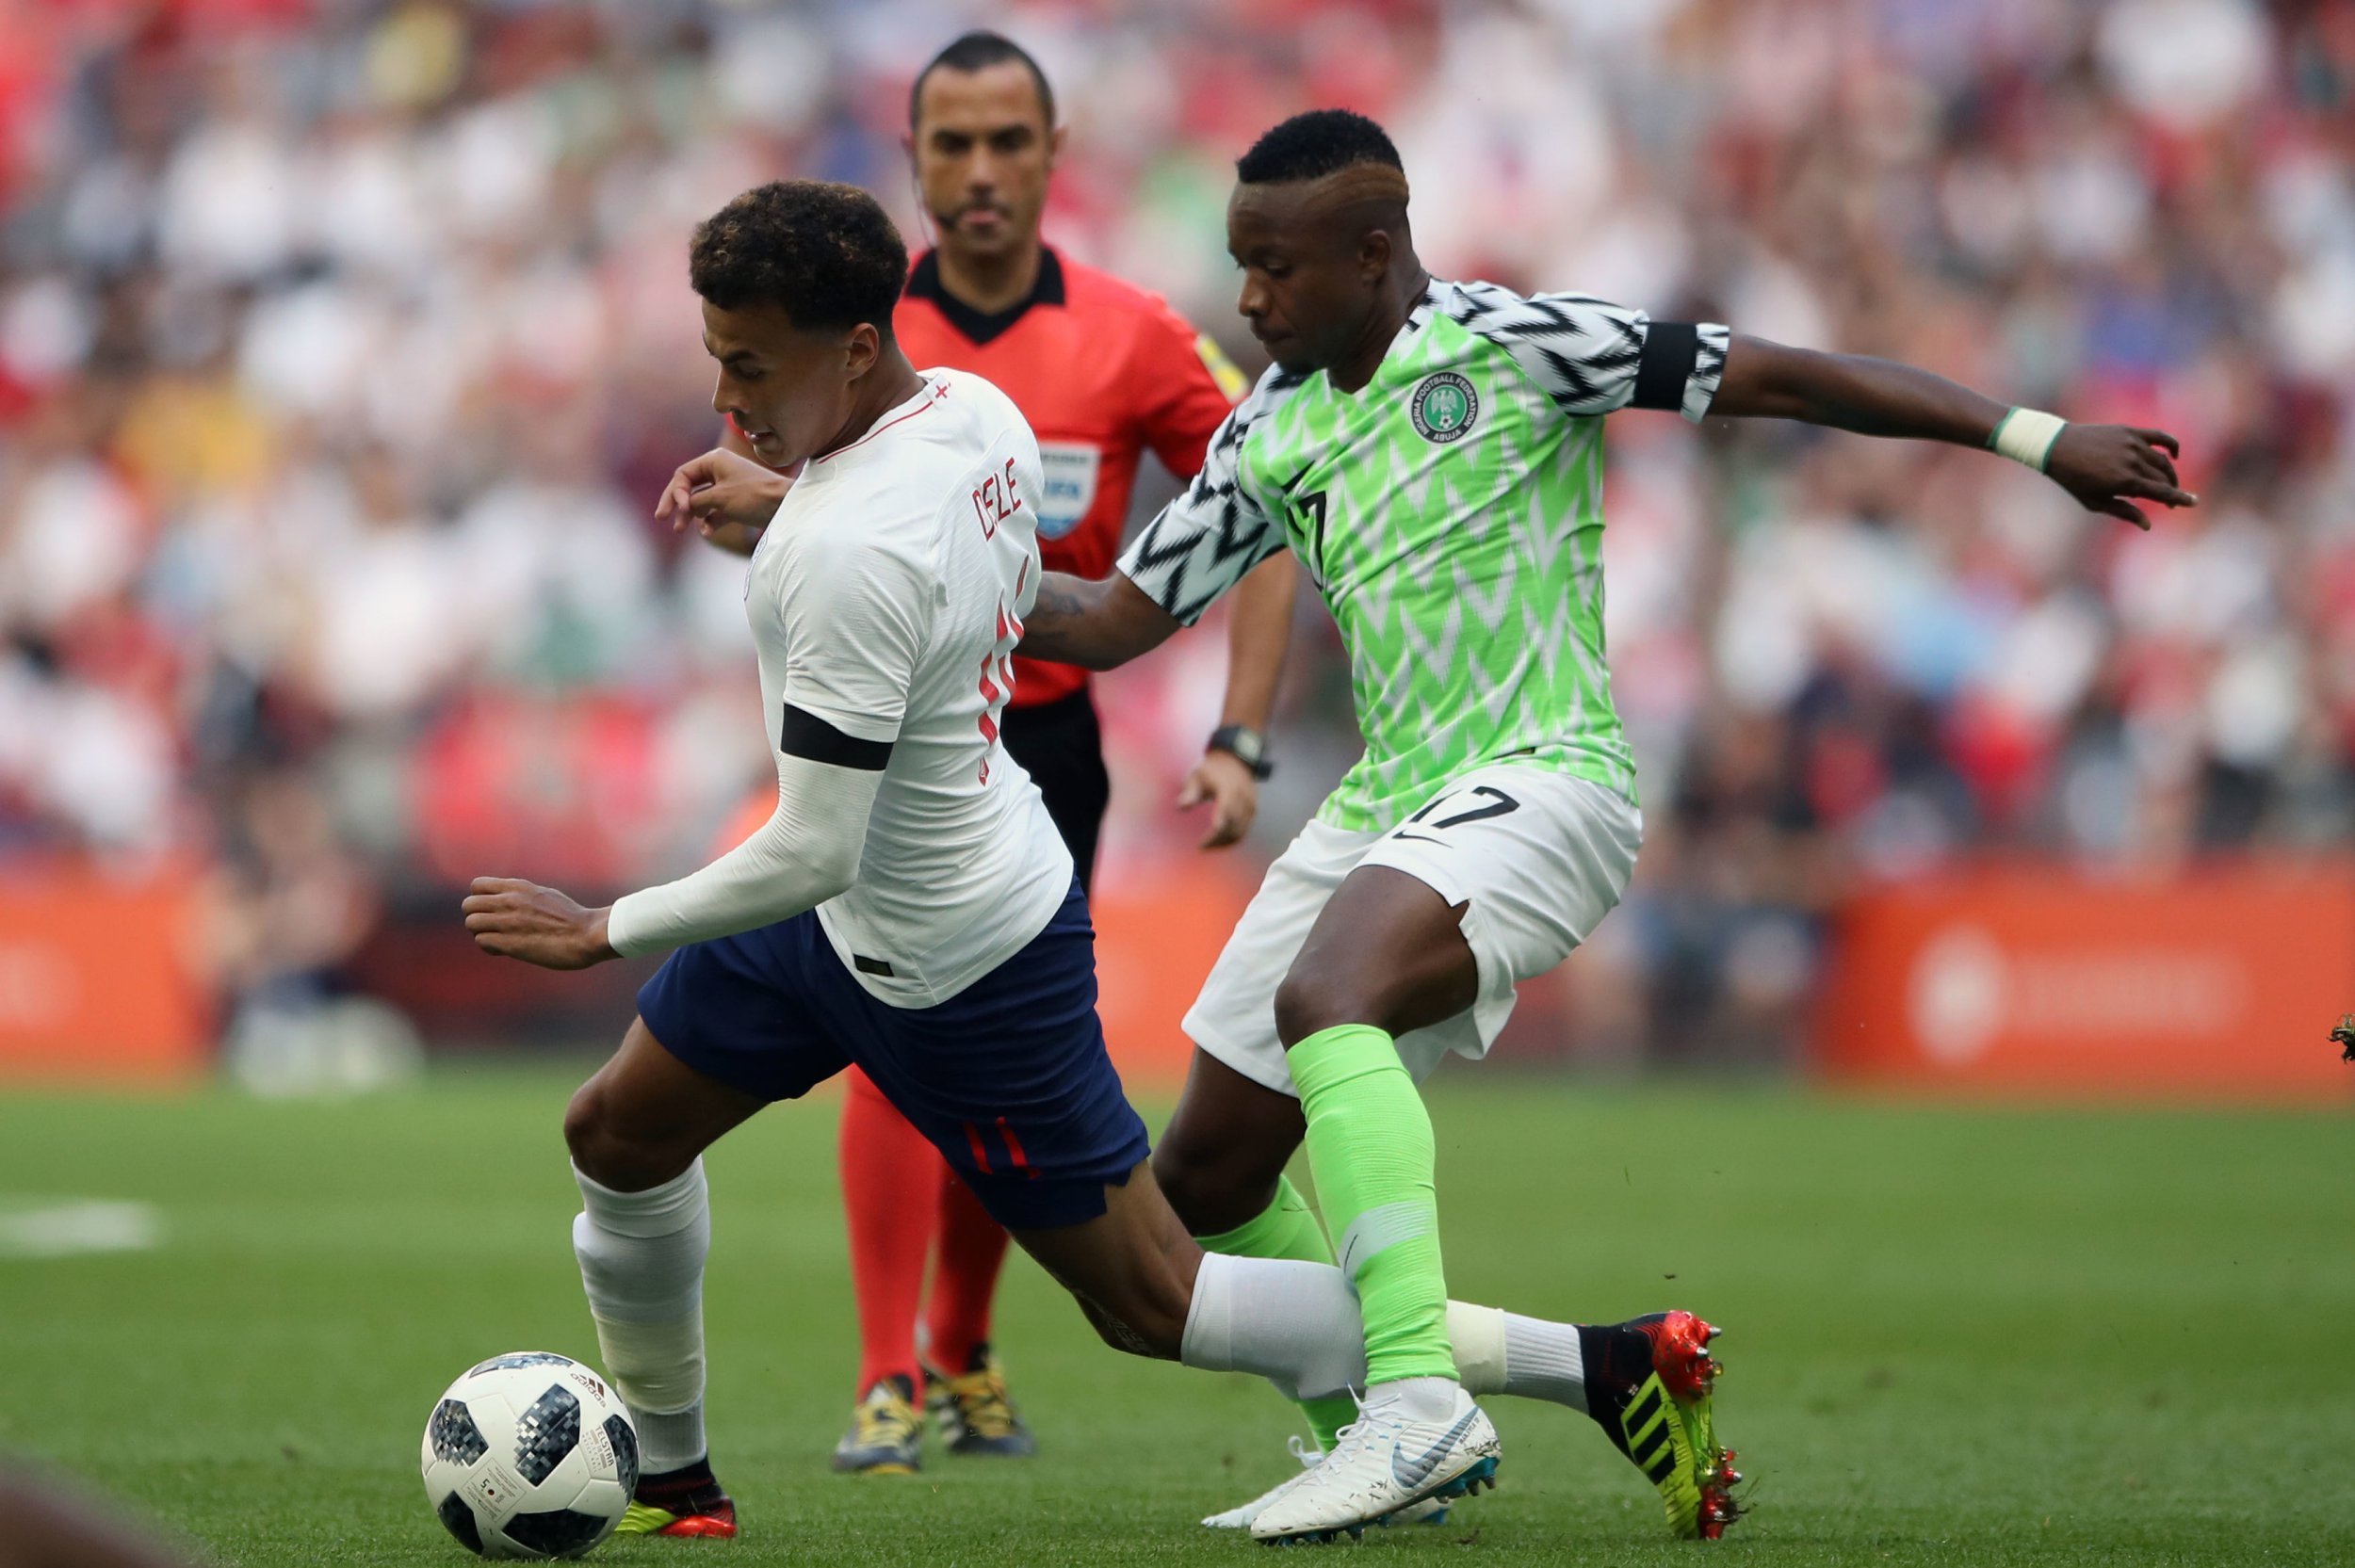 Dele Alli's heritage reason why England was booed by Nigerian fans at Wembley